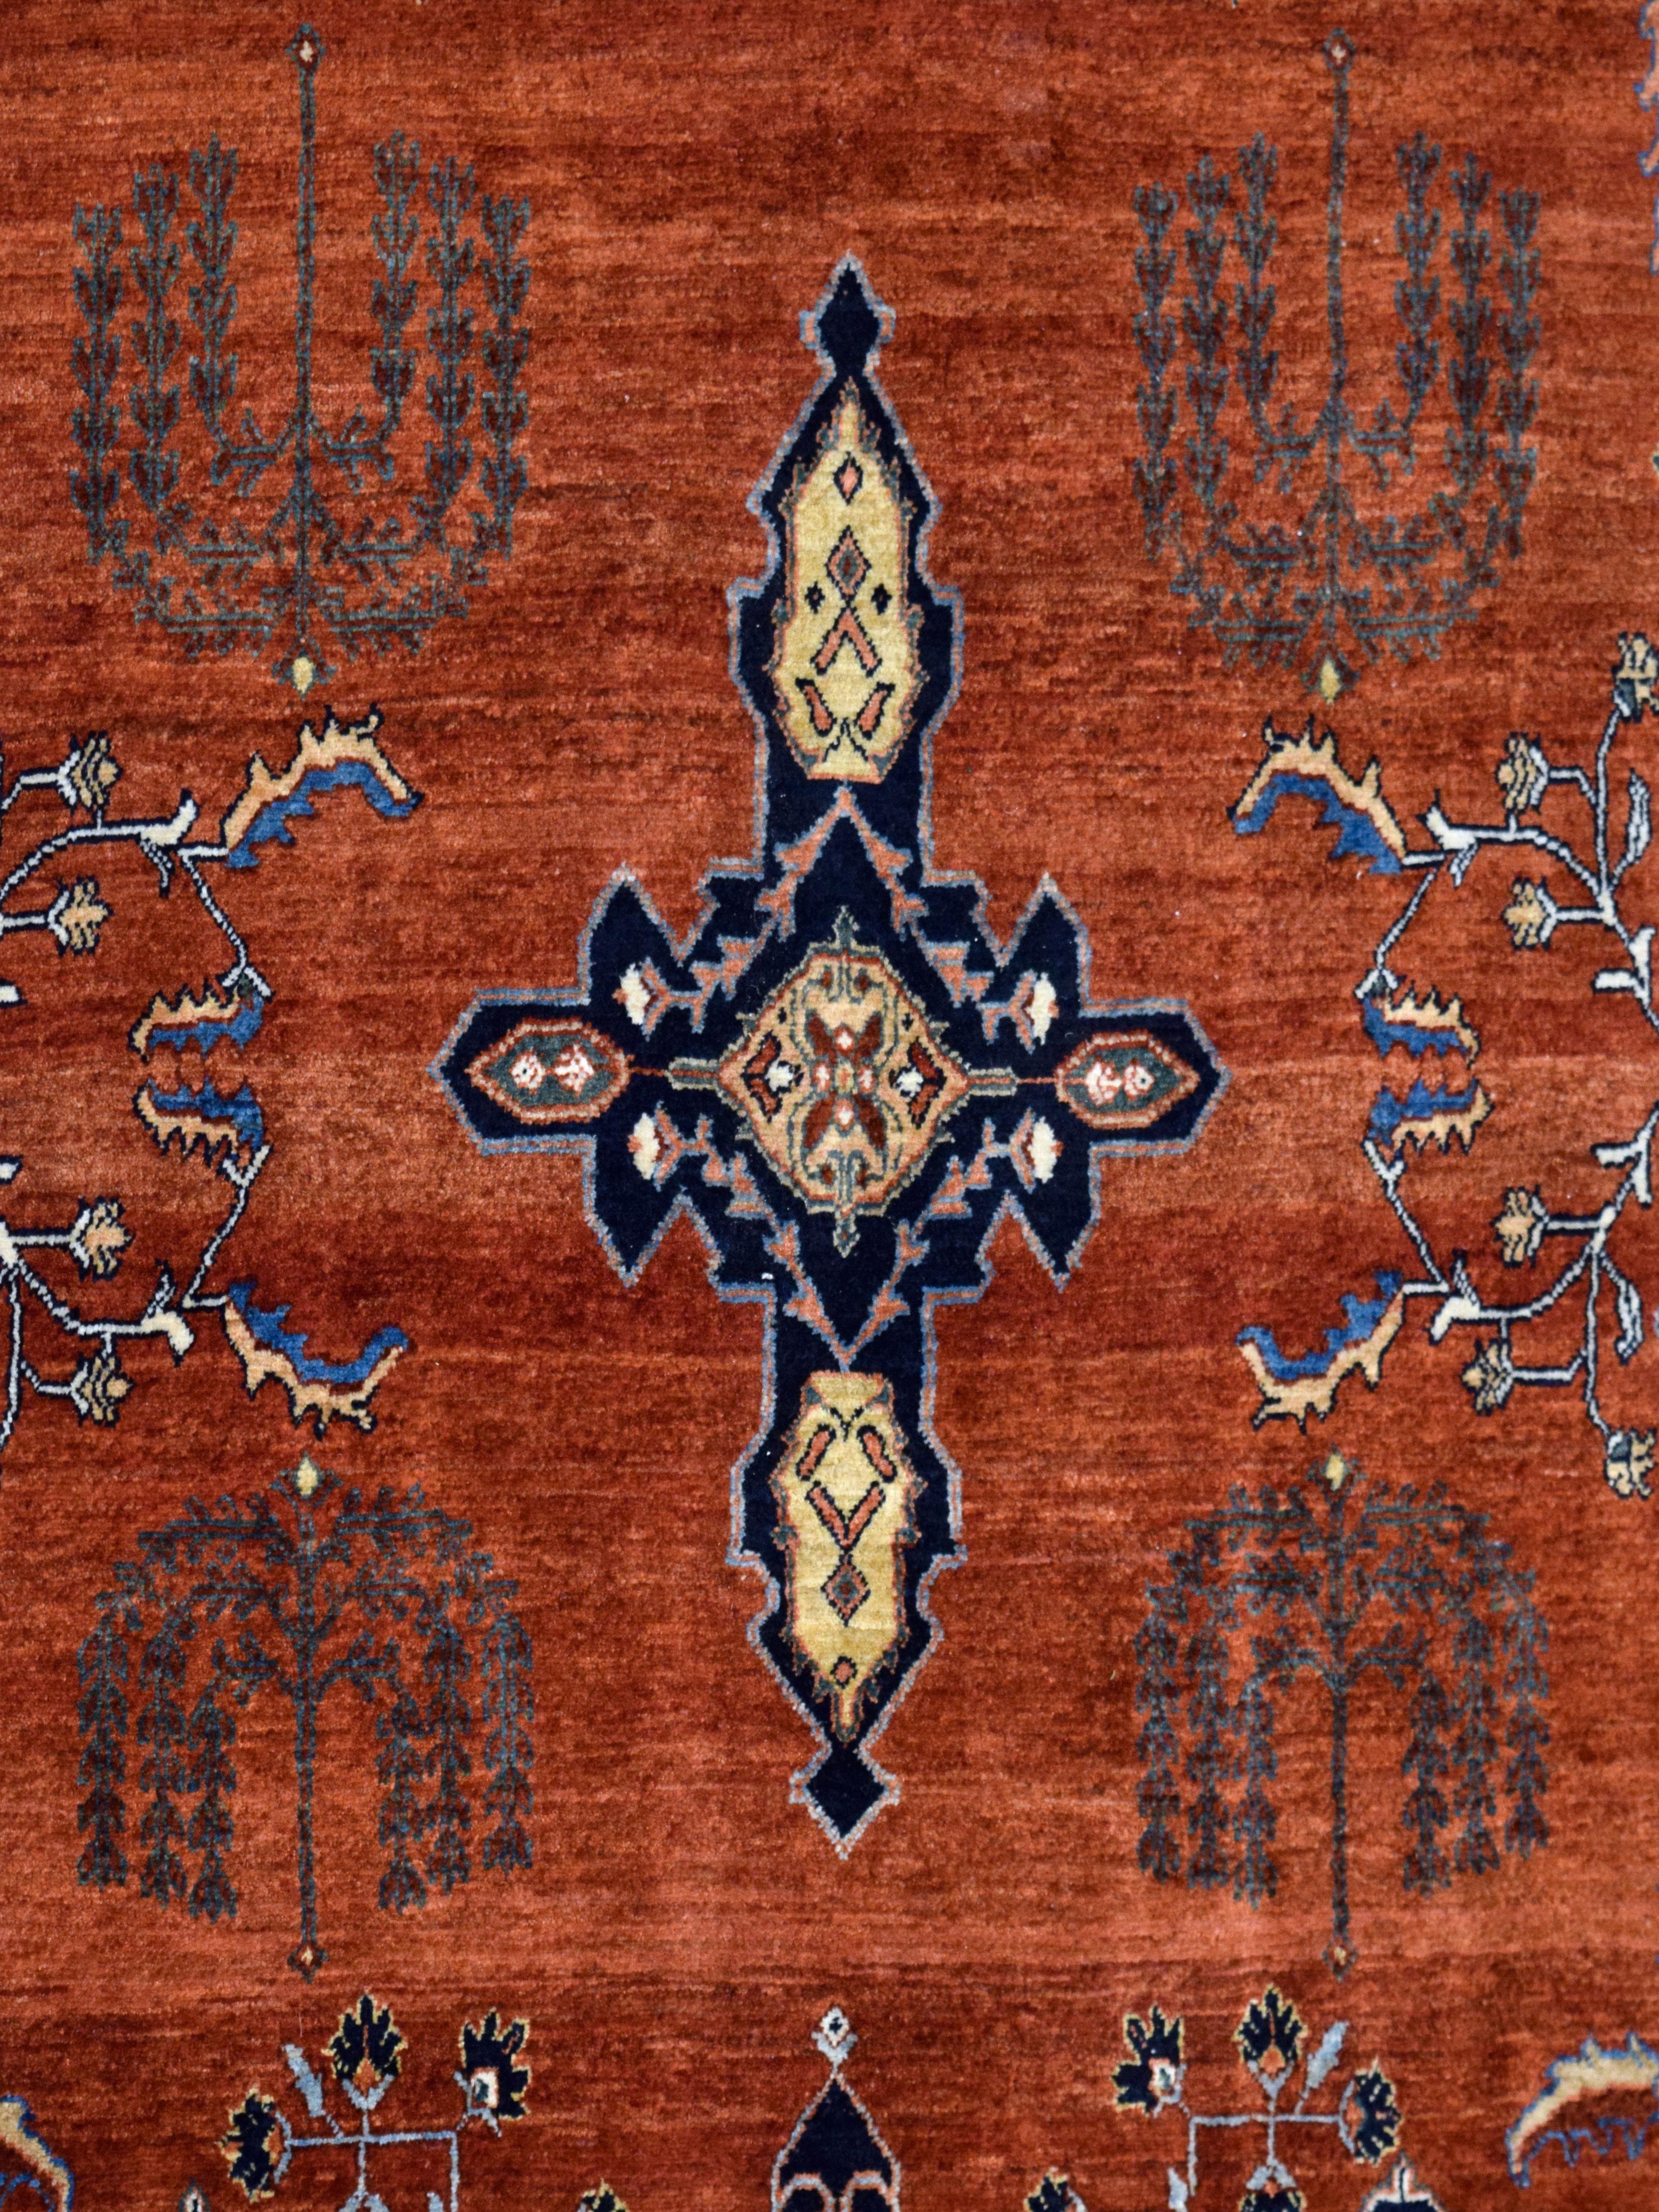 With deep and robust shades of red, indigo, green, and gold wool, this hand-knotted Mohajeran carpet measures 8’8” x 13’ and is a true homage to classic Persian rugs. Stemming from the Sarouk family of carpets, Mohajerani carpets are the rarest